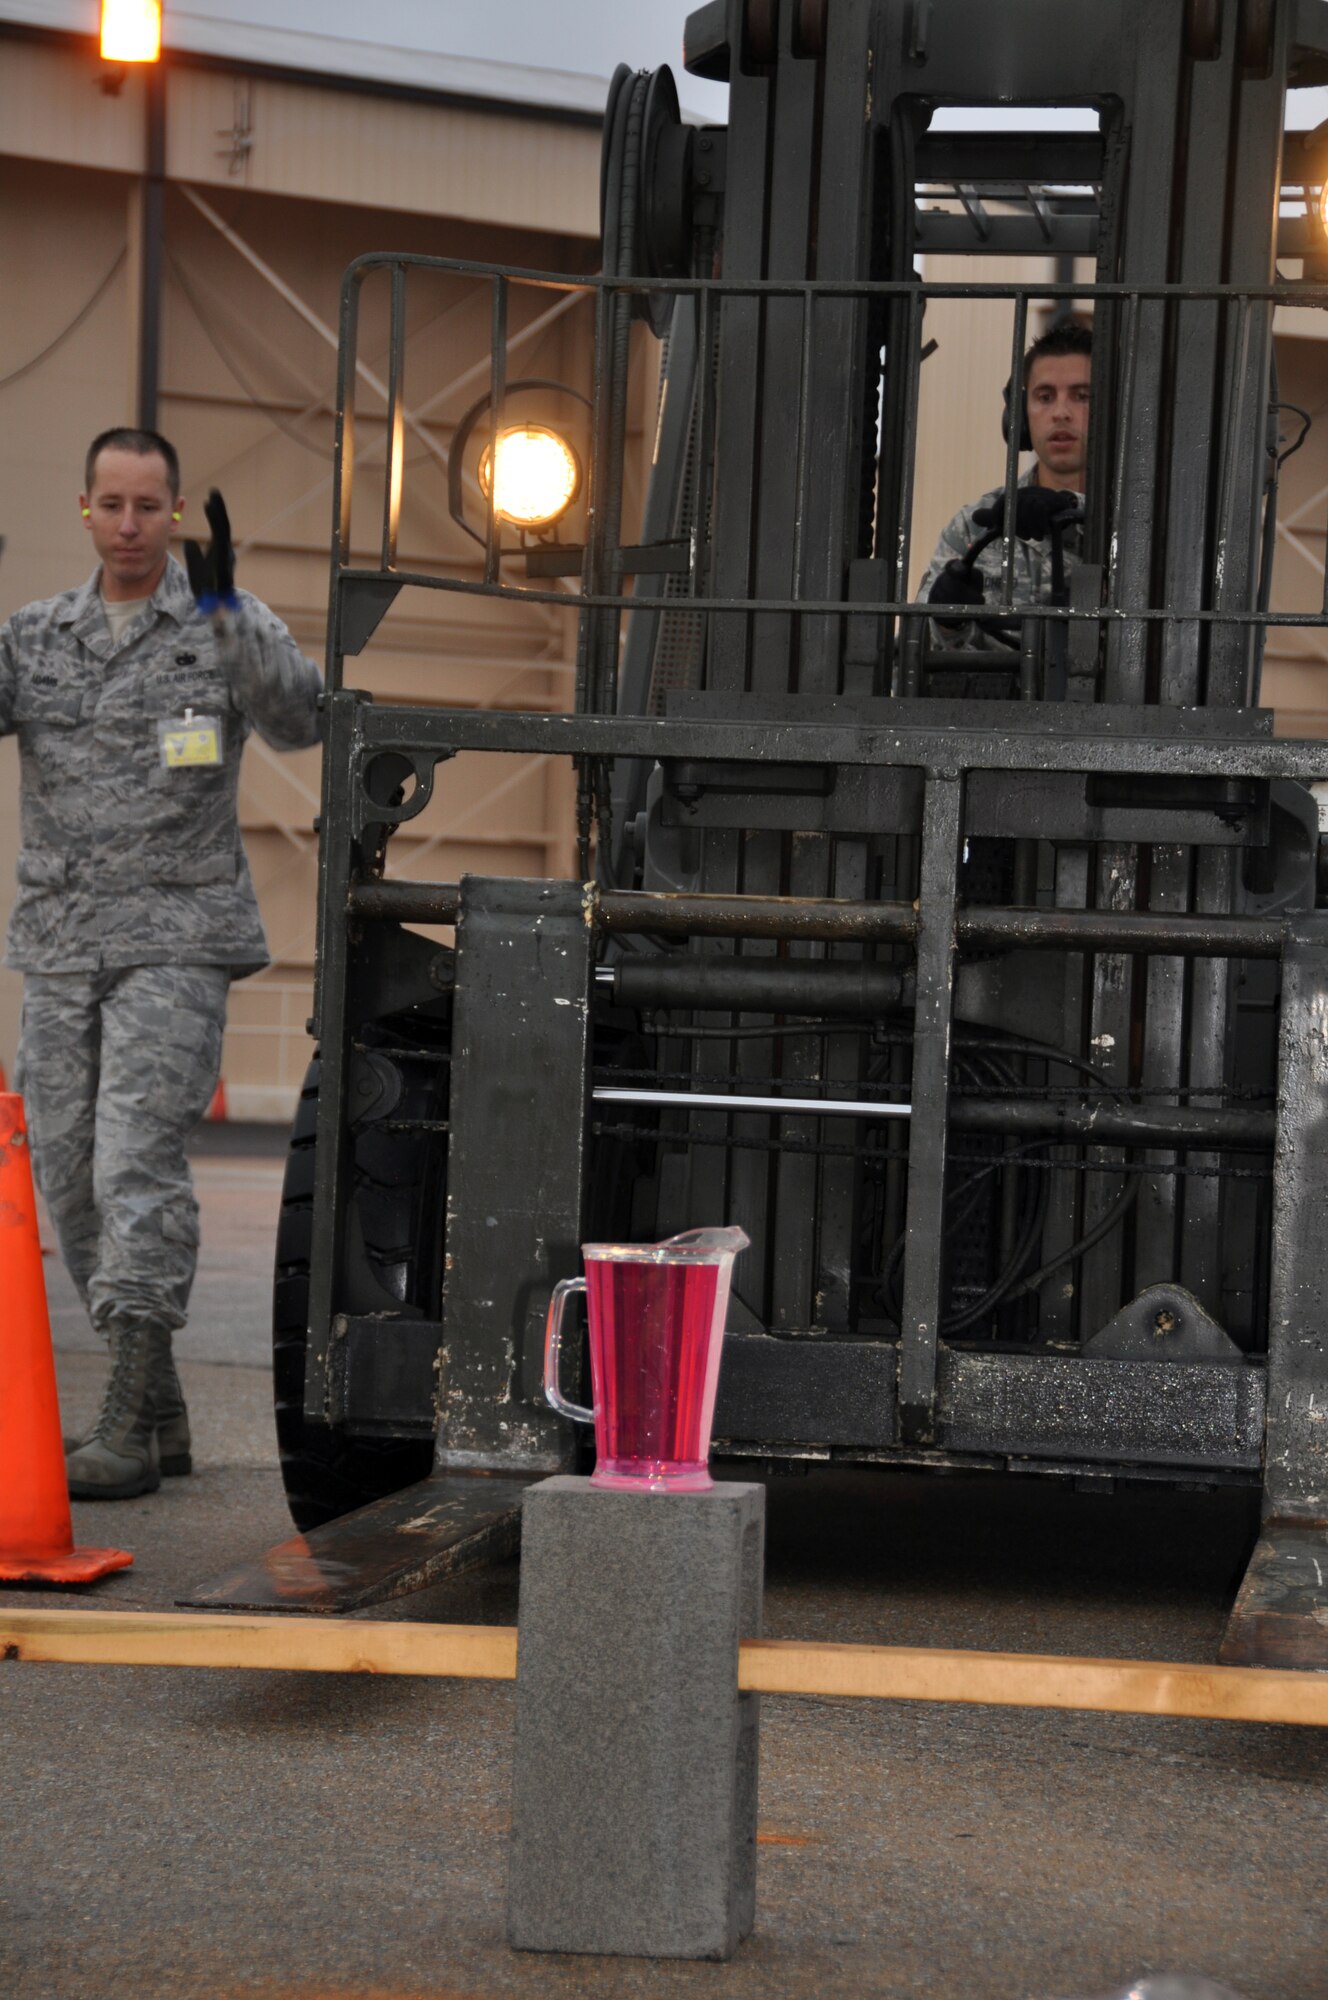 Tech. Sgt. Justin Adams (left) guides Senior Airman Sterling Broadhead, both of the 67th Aerial Port Squadron, through a driving course at AFRC's Port Dawg Challenge Oct. 29. In the timed event, Airman Broadhead had to maneuver a 10K forklift through cones without spilling the contents of the pitcher. (U.S. Air Force photo/Bryan Magaña)